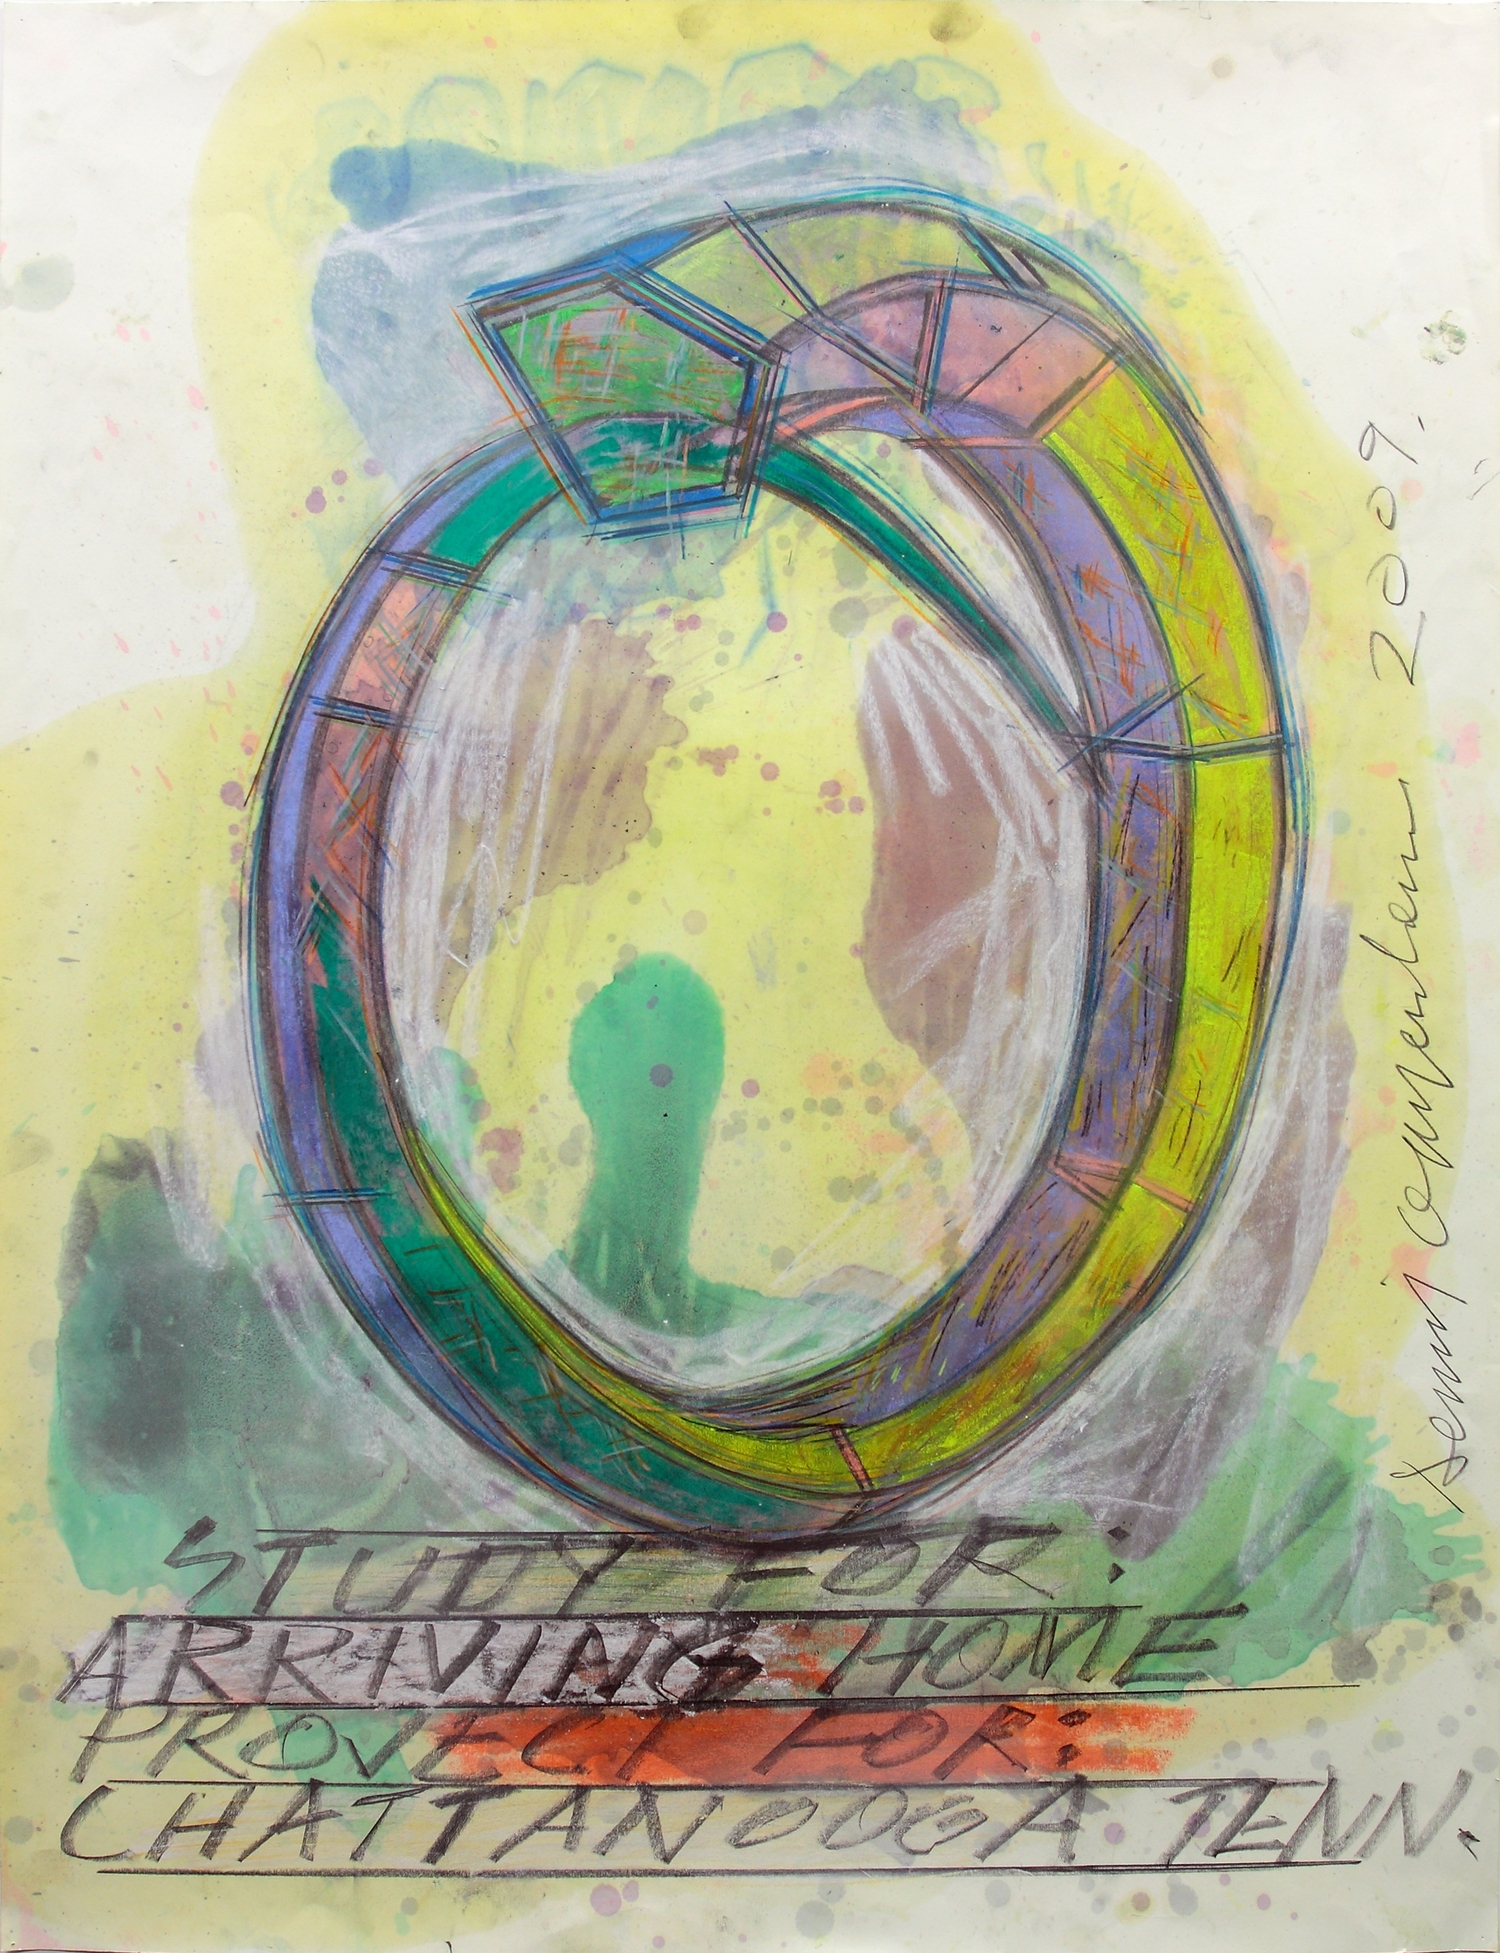 A sketch of a glass circle with text, "Study for arriving home, prove for Chattanooga, Tenn."